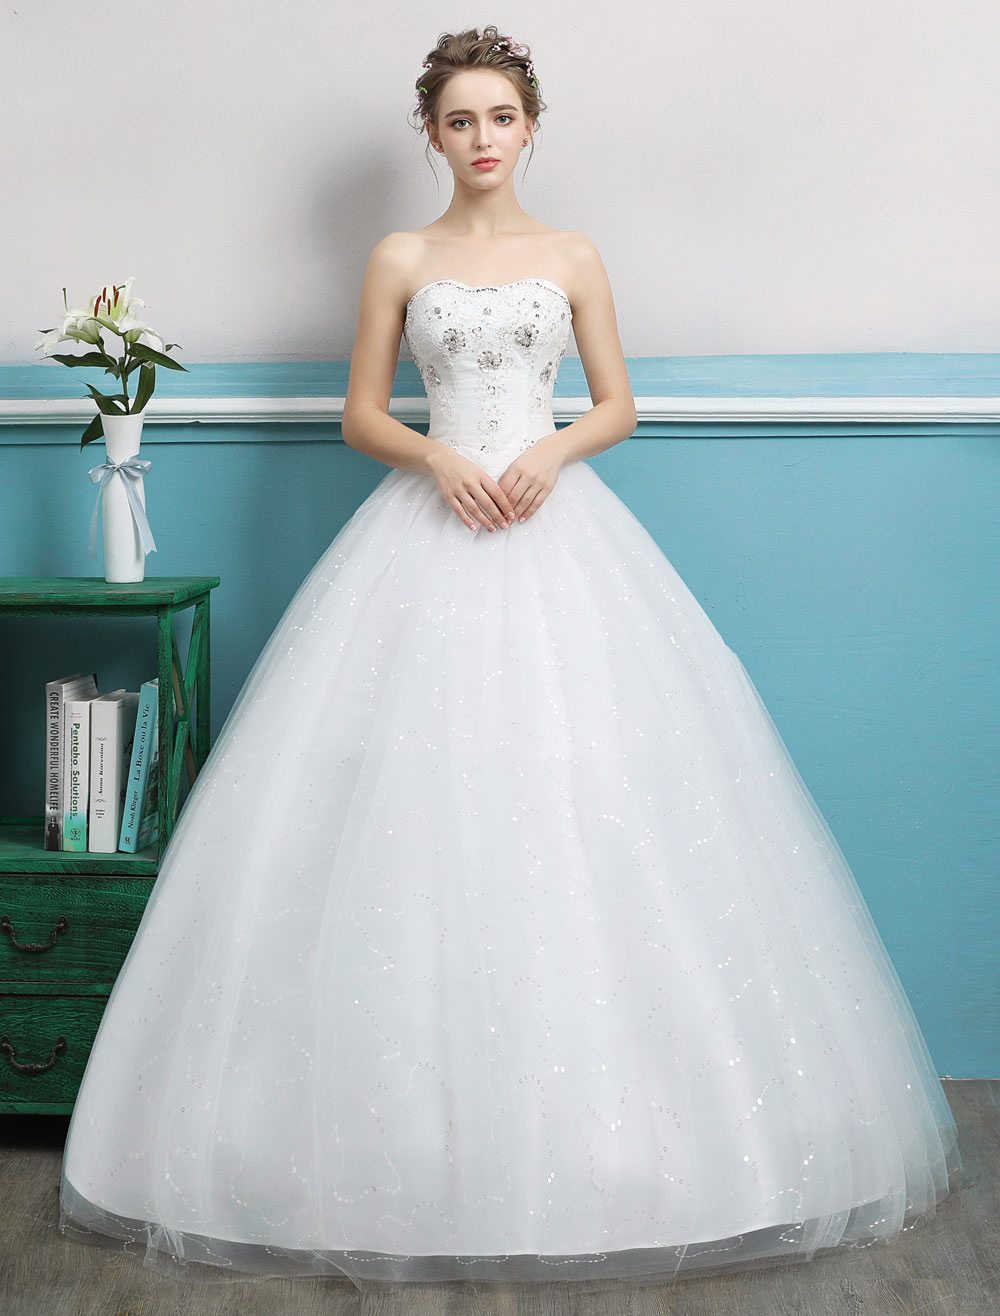 Princess Rhinestones Ball Gown Wedding Dress Off The Shoulder Narsbridal Online Store Powered By Storenvy